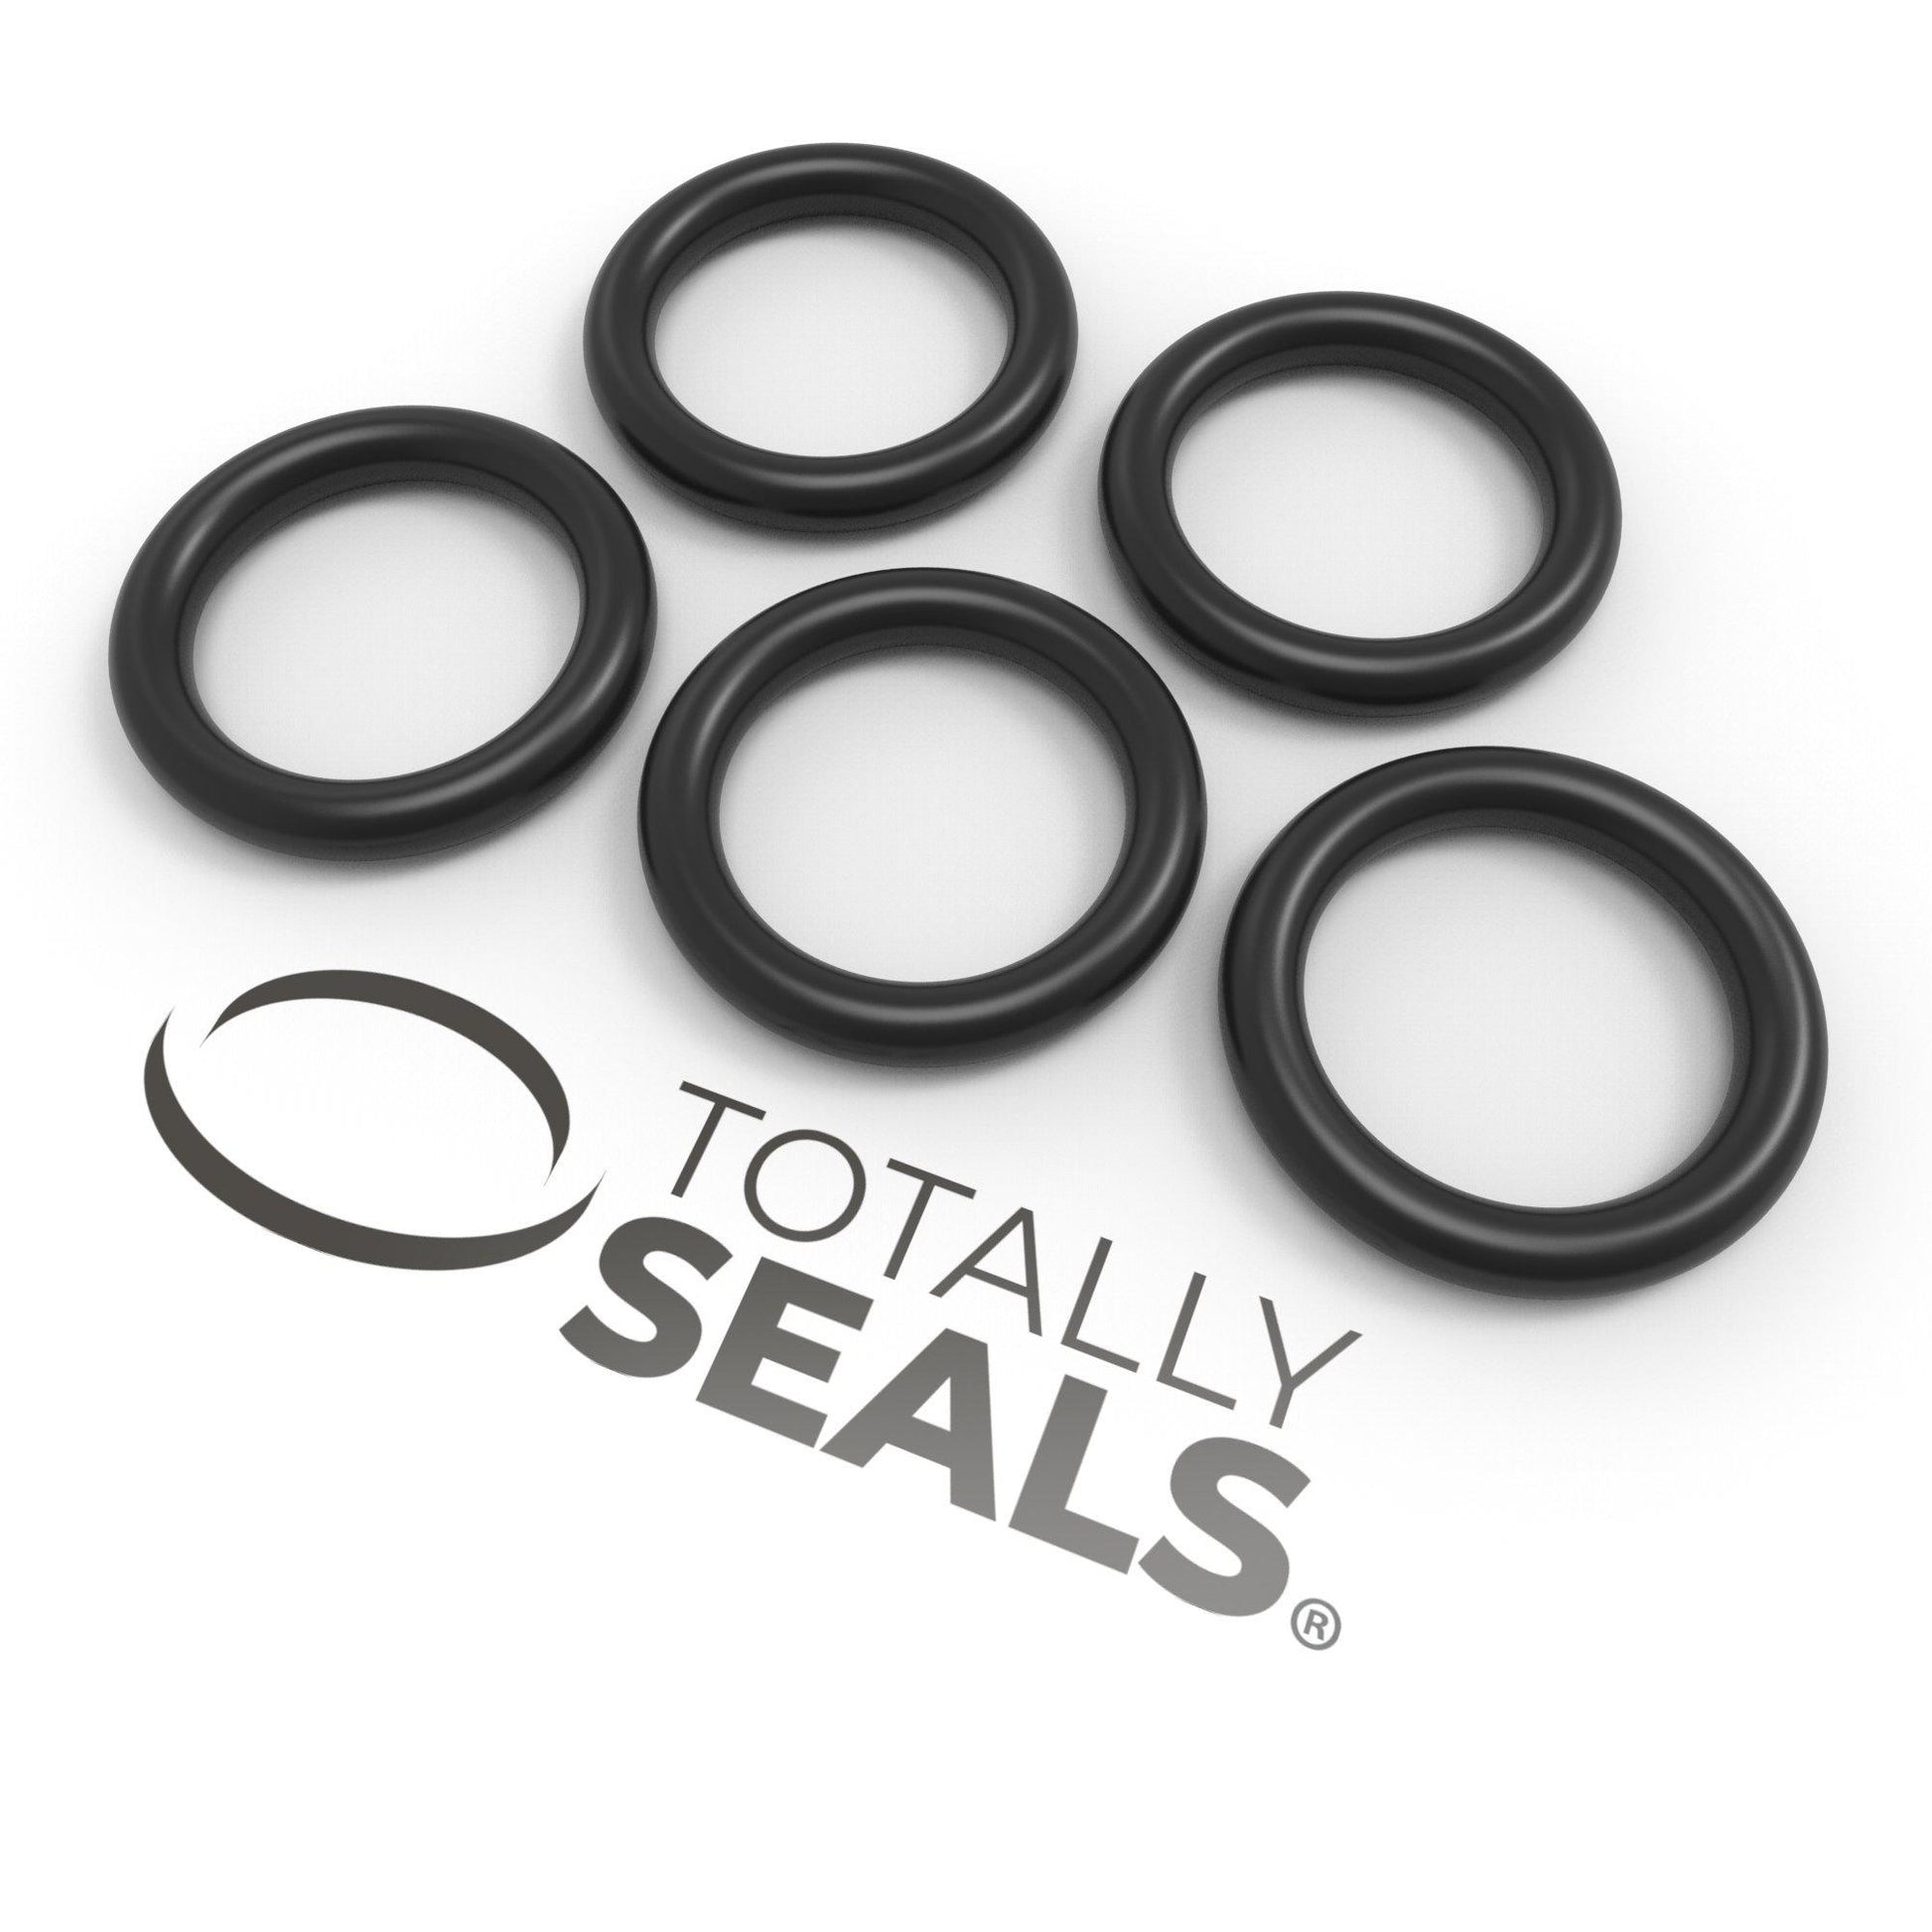 27mm x 2mm (31mm OD) Nitrile O-Rings - Totally Seals®